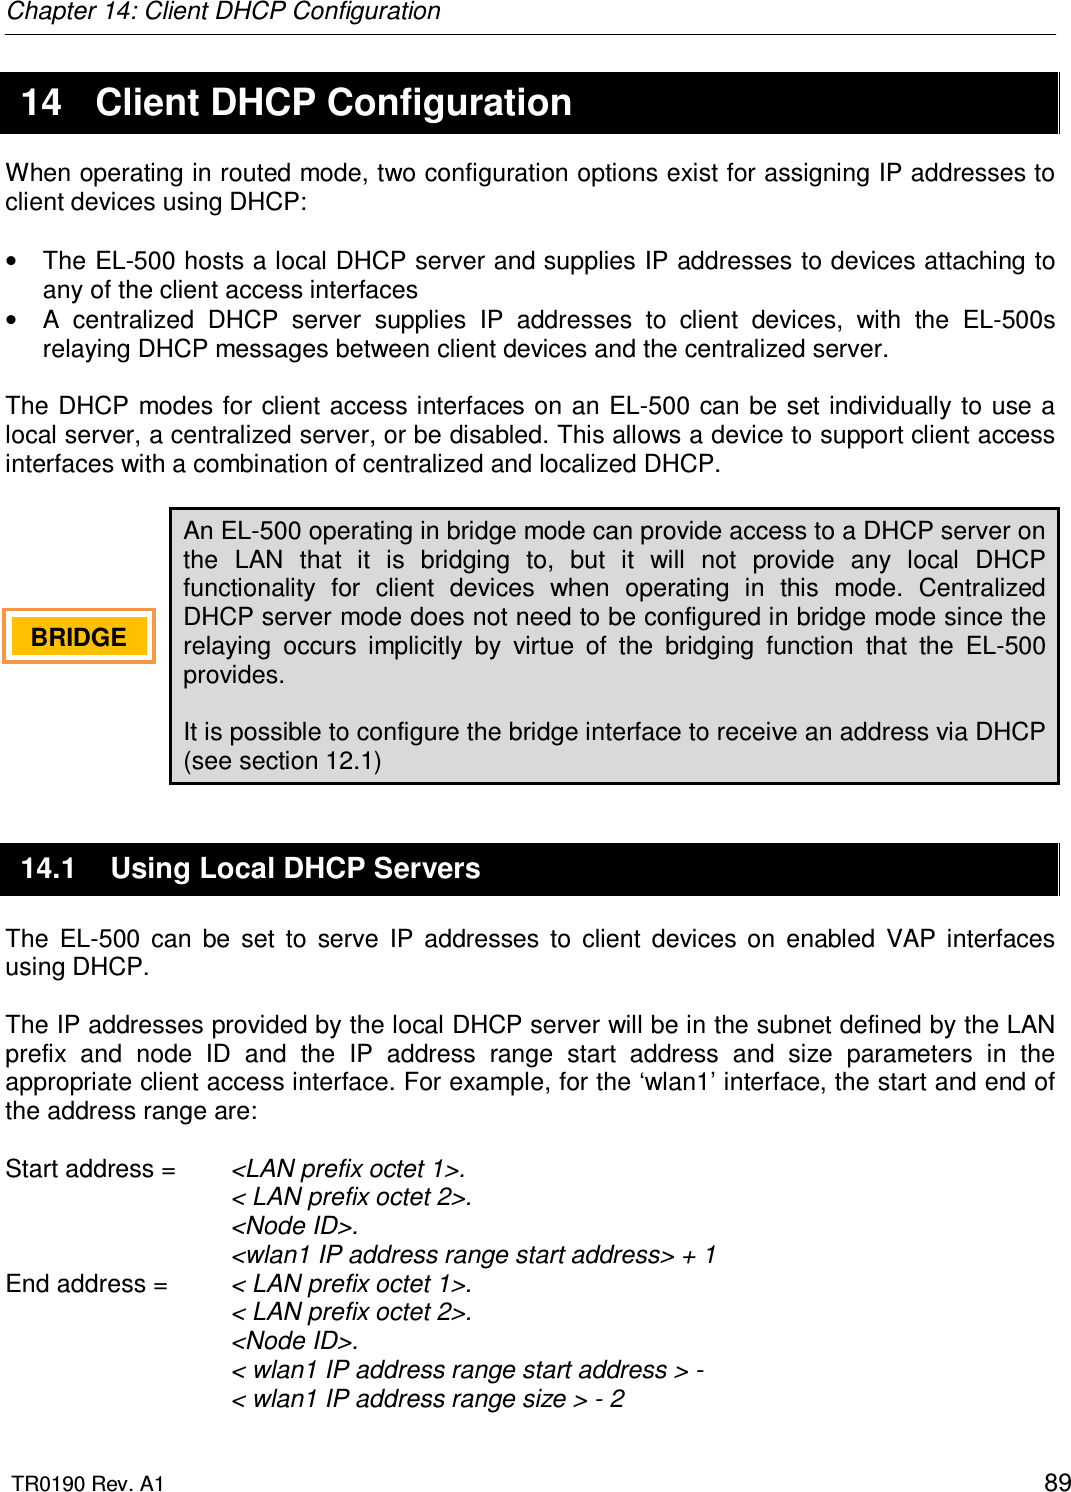 Chapter 14: Client DHCP Configuration  TR0190 Rev. A1    89 14  Client DHCP Configuration When operating in routed mode, two configuration options exist for assigning IP addresses to client devices using DHCP:  •  The EL-500 hosts a local DHCP server and supplies IP addresses to devices attaching to any of the client access interfaces  •  A  centralized  DHCP  server  supplies  IP  addresses  to  client  devices,  with  the  EL-500s relaying DHCP messages between client devices and the centralized server.  The DHCP modes for client access interfaces on an EL-500 can be set individually to use a local server, a centralized server, or be disabled. This allows a device to support client access interfaces with a combination of centralized and localized DHCP.  An EL-500 operating in bridge mode can provide access to a DHCP server on the  LAN  that  it  is  bridging  to,  but  it  will  not  provide  any  local  DHCP functionality  for  client  devices  when  operating  in  this  mode.  Centralized DHCP server mode does not need to be configured in bridge mode since the relaying  occurs  implicitly  by  virtue  of  the  bridging  function  that  the  EL-500 provides.  It is possible to configure the bridge interface to receive an address via DHCP (see section 12.1) 14.1  Using Local DHCP Servers The  EL-500  can  be  set  to  serve  IP  addresses  to  client  devices  on  enabled  VAP  interfaces using DHCP.   The IP addresses provided by the local DHCP server will be in the subnet defined by the LAN prefix  and  node  ID  and  the  IP  address  range  start  address  and  size  parameters  in  the appropriate client access interface. For example, for the ‘wlan1’ interface, the start and end of the address range are:  Start address =   &lt;LAN prefix octet 1&gt;. &lt; LAN prefix octet 2&gt;. &lt;Node ID&gt;. &lt;wlan1 IP address range start address&gt; + 1 End address =   &lt; LAN prefix octet 1&gt;. &lt; LAN prefix octet 2&gt;. &lt;Node ID&gt;. &lt; wlan1 IP address range start address &gt; -  &lt; wlan1 IP address range size &gt; - 2 BRIDGE   